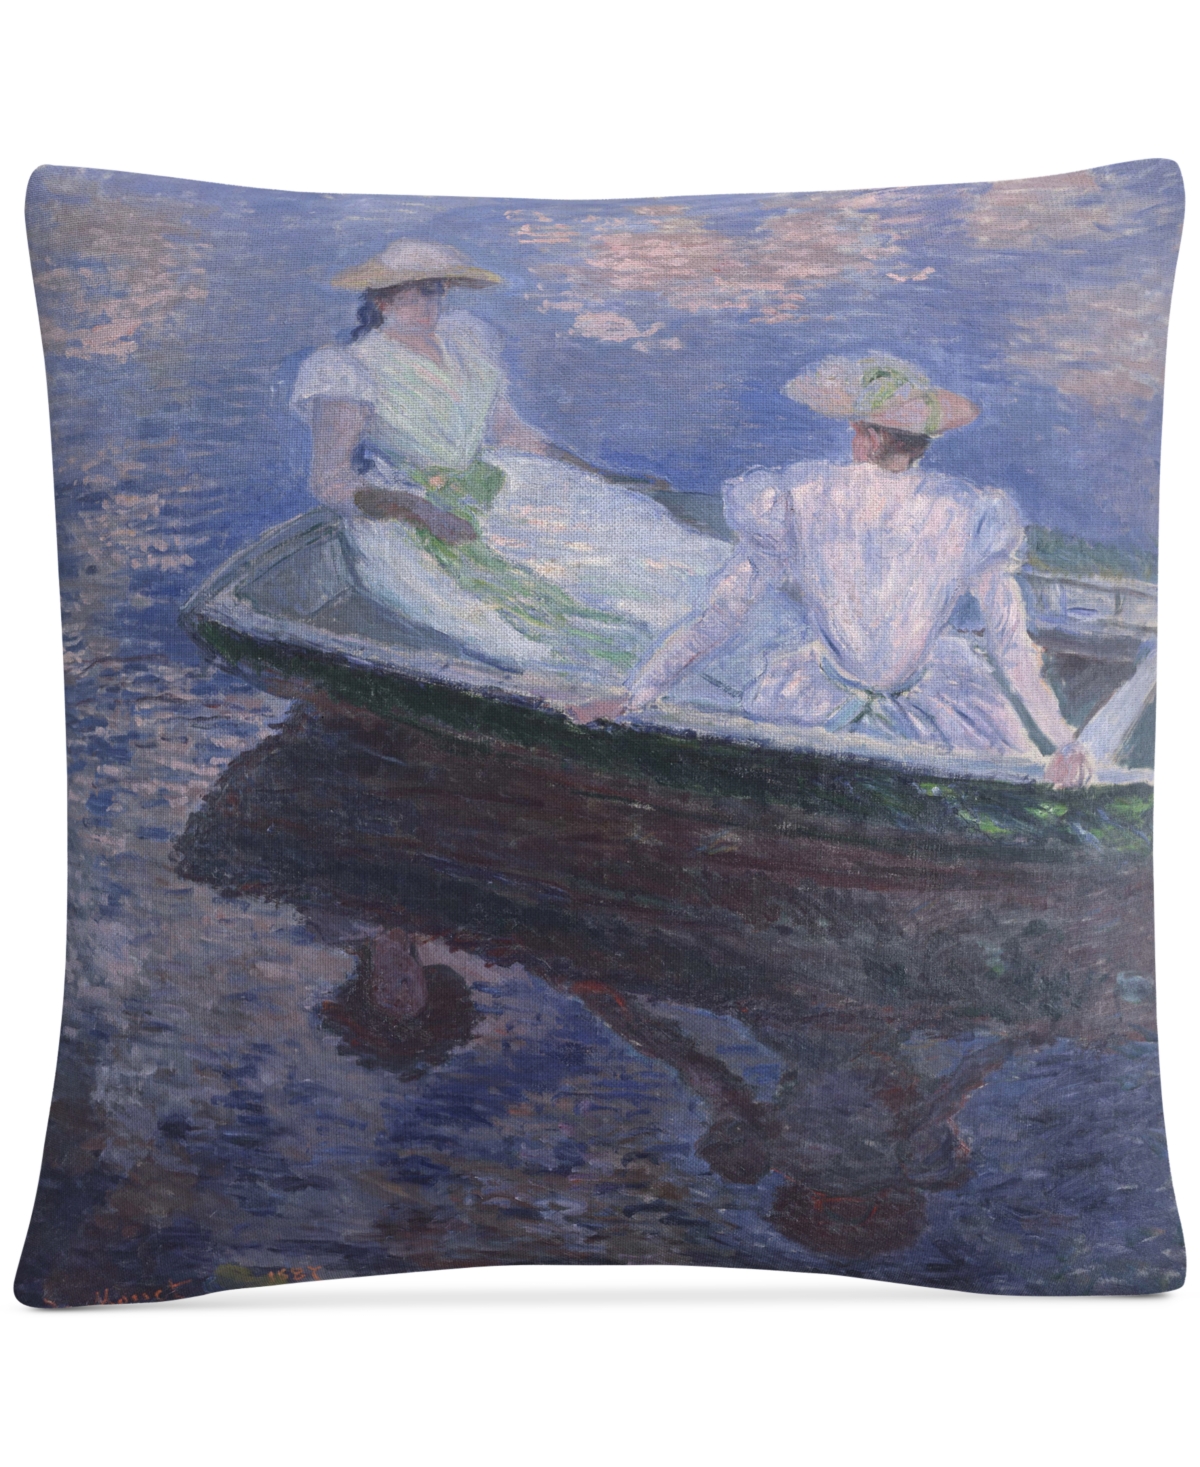 Claude Monet On The Boat Decorative Pillow, 16 x 16